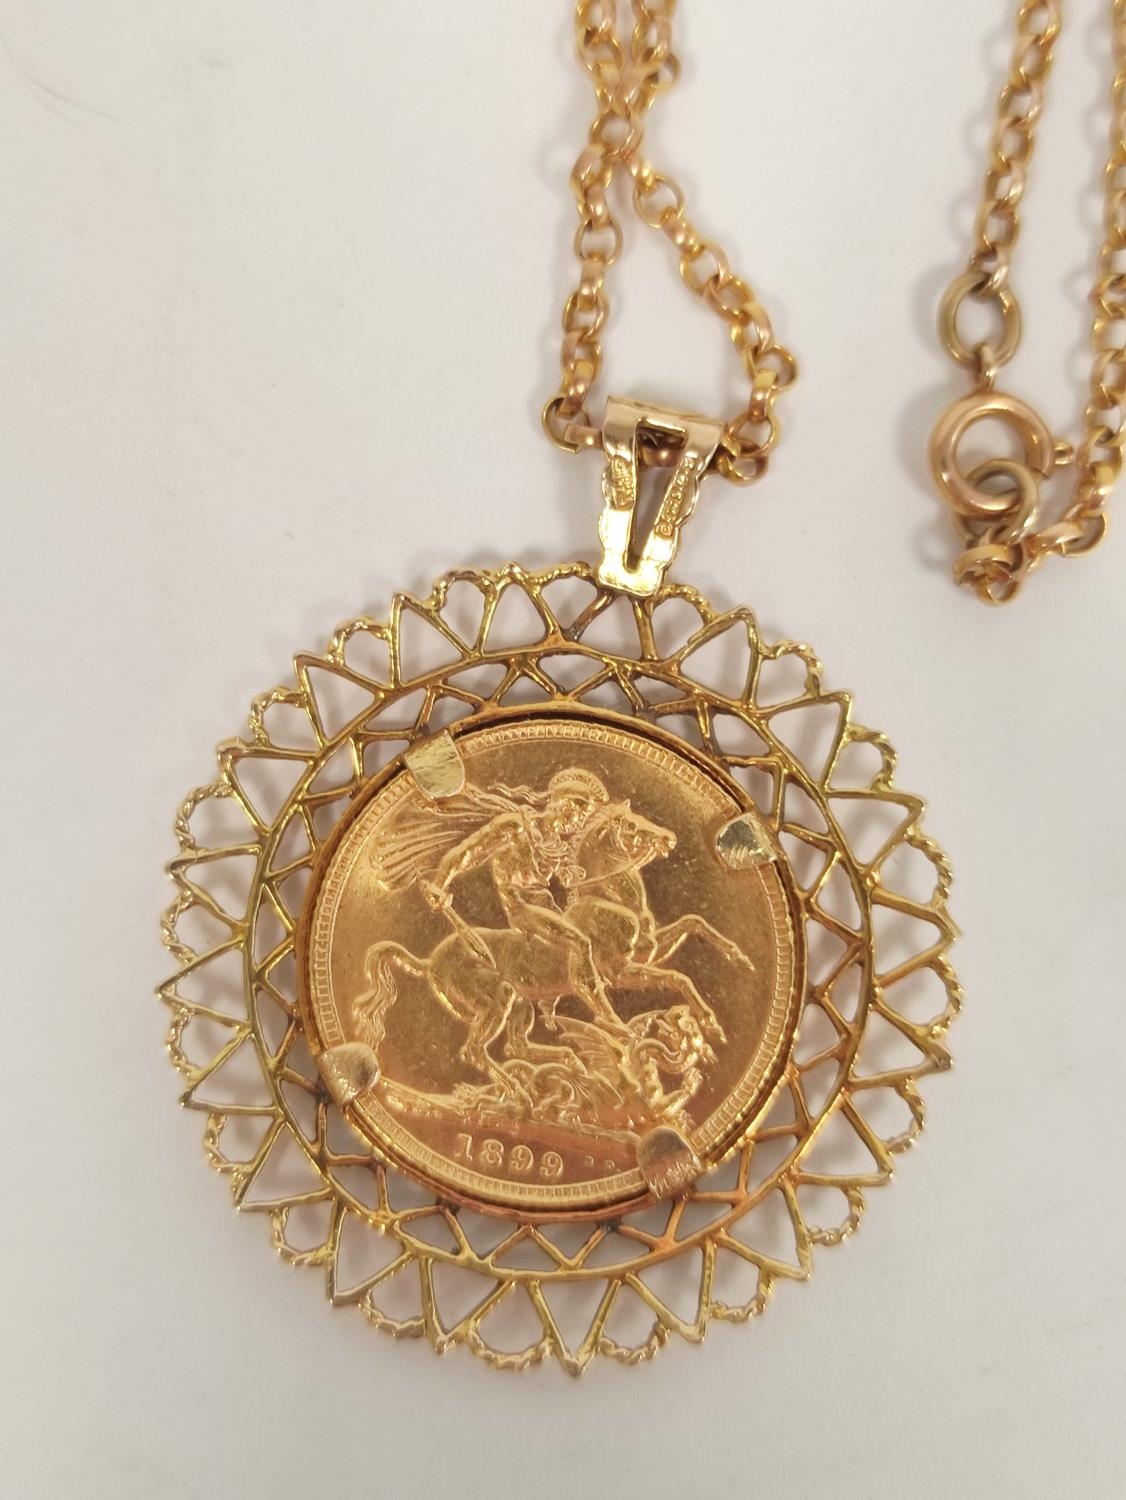 Sovereign 1899, 9ct. gold detachable pendant mount and necklet 54cm, gross 18g. - Image 4 of 5